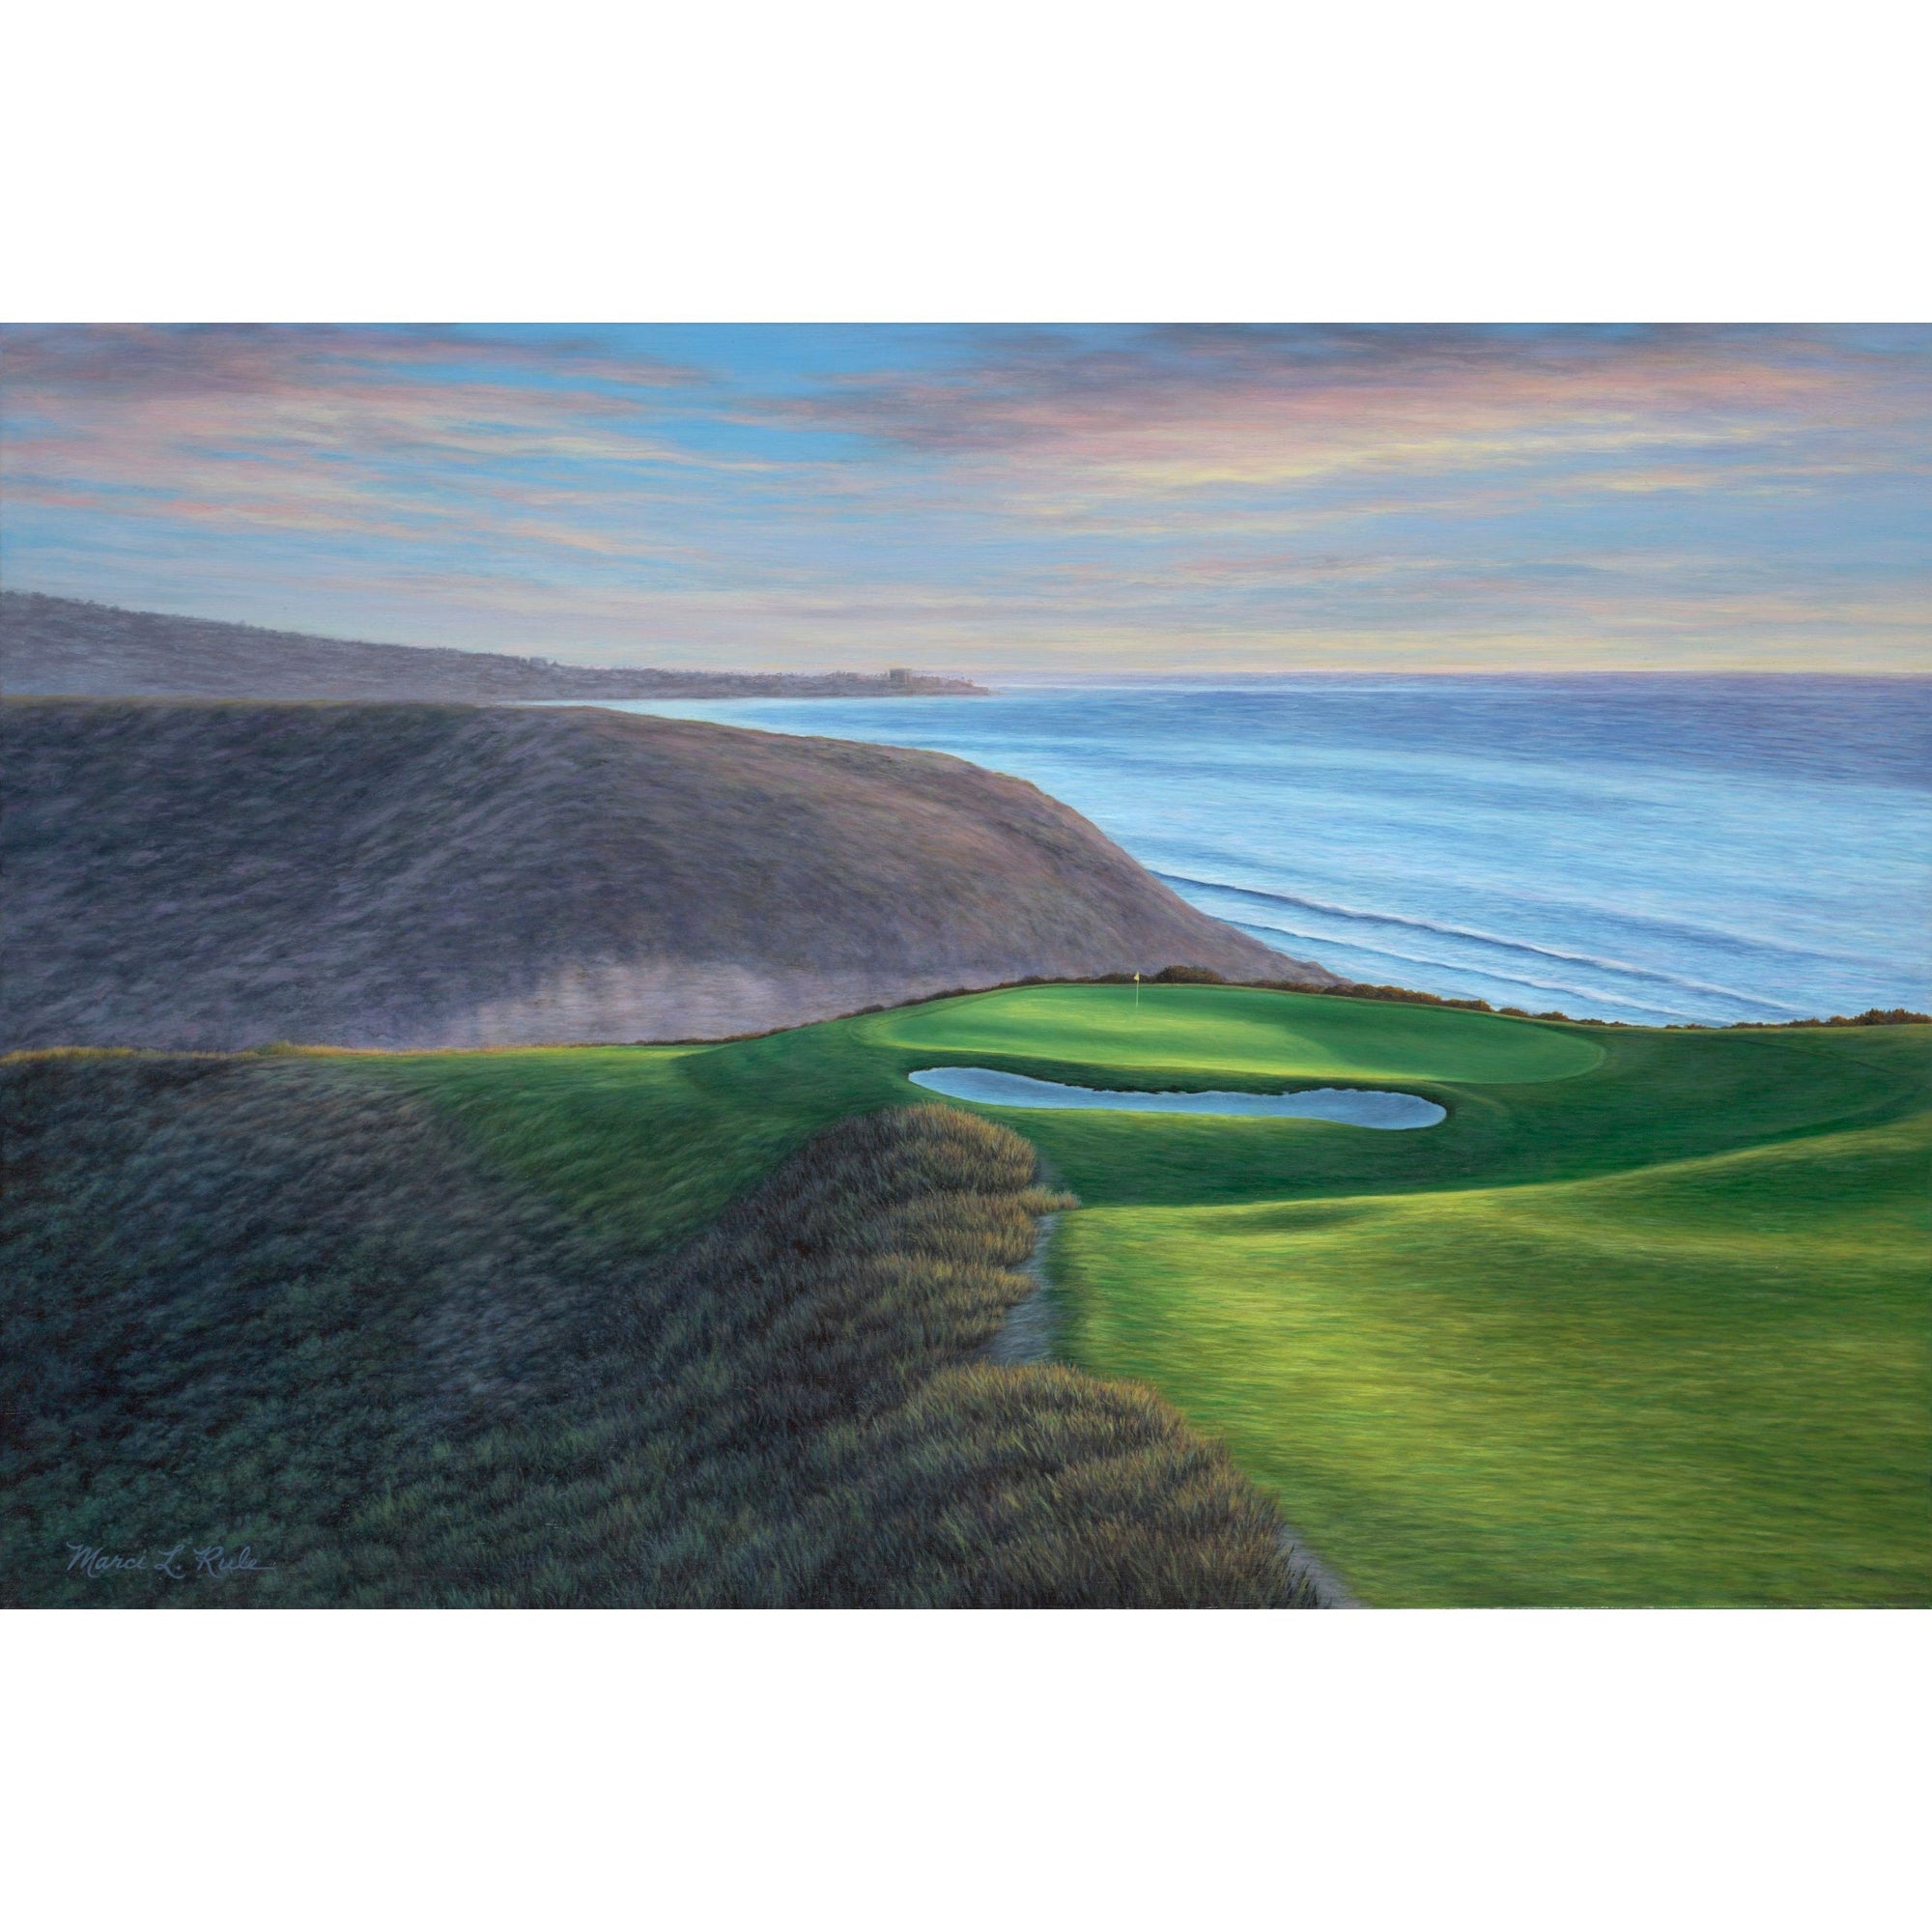 Torrey Pines #3, South Course is a beautiful par 3 golf landscape on the cliffs overlooking the Pacific Ocean with a sunset in the background.